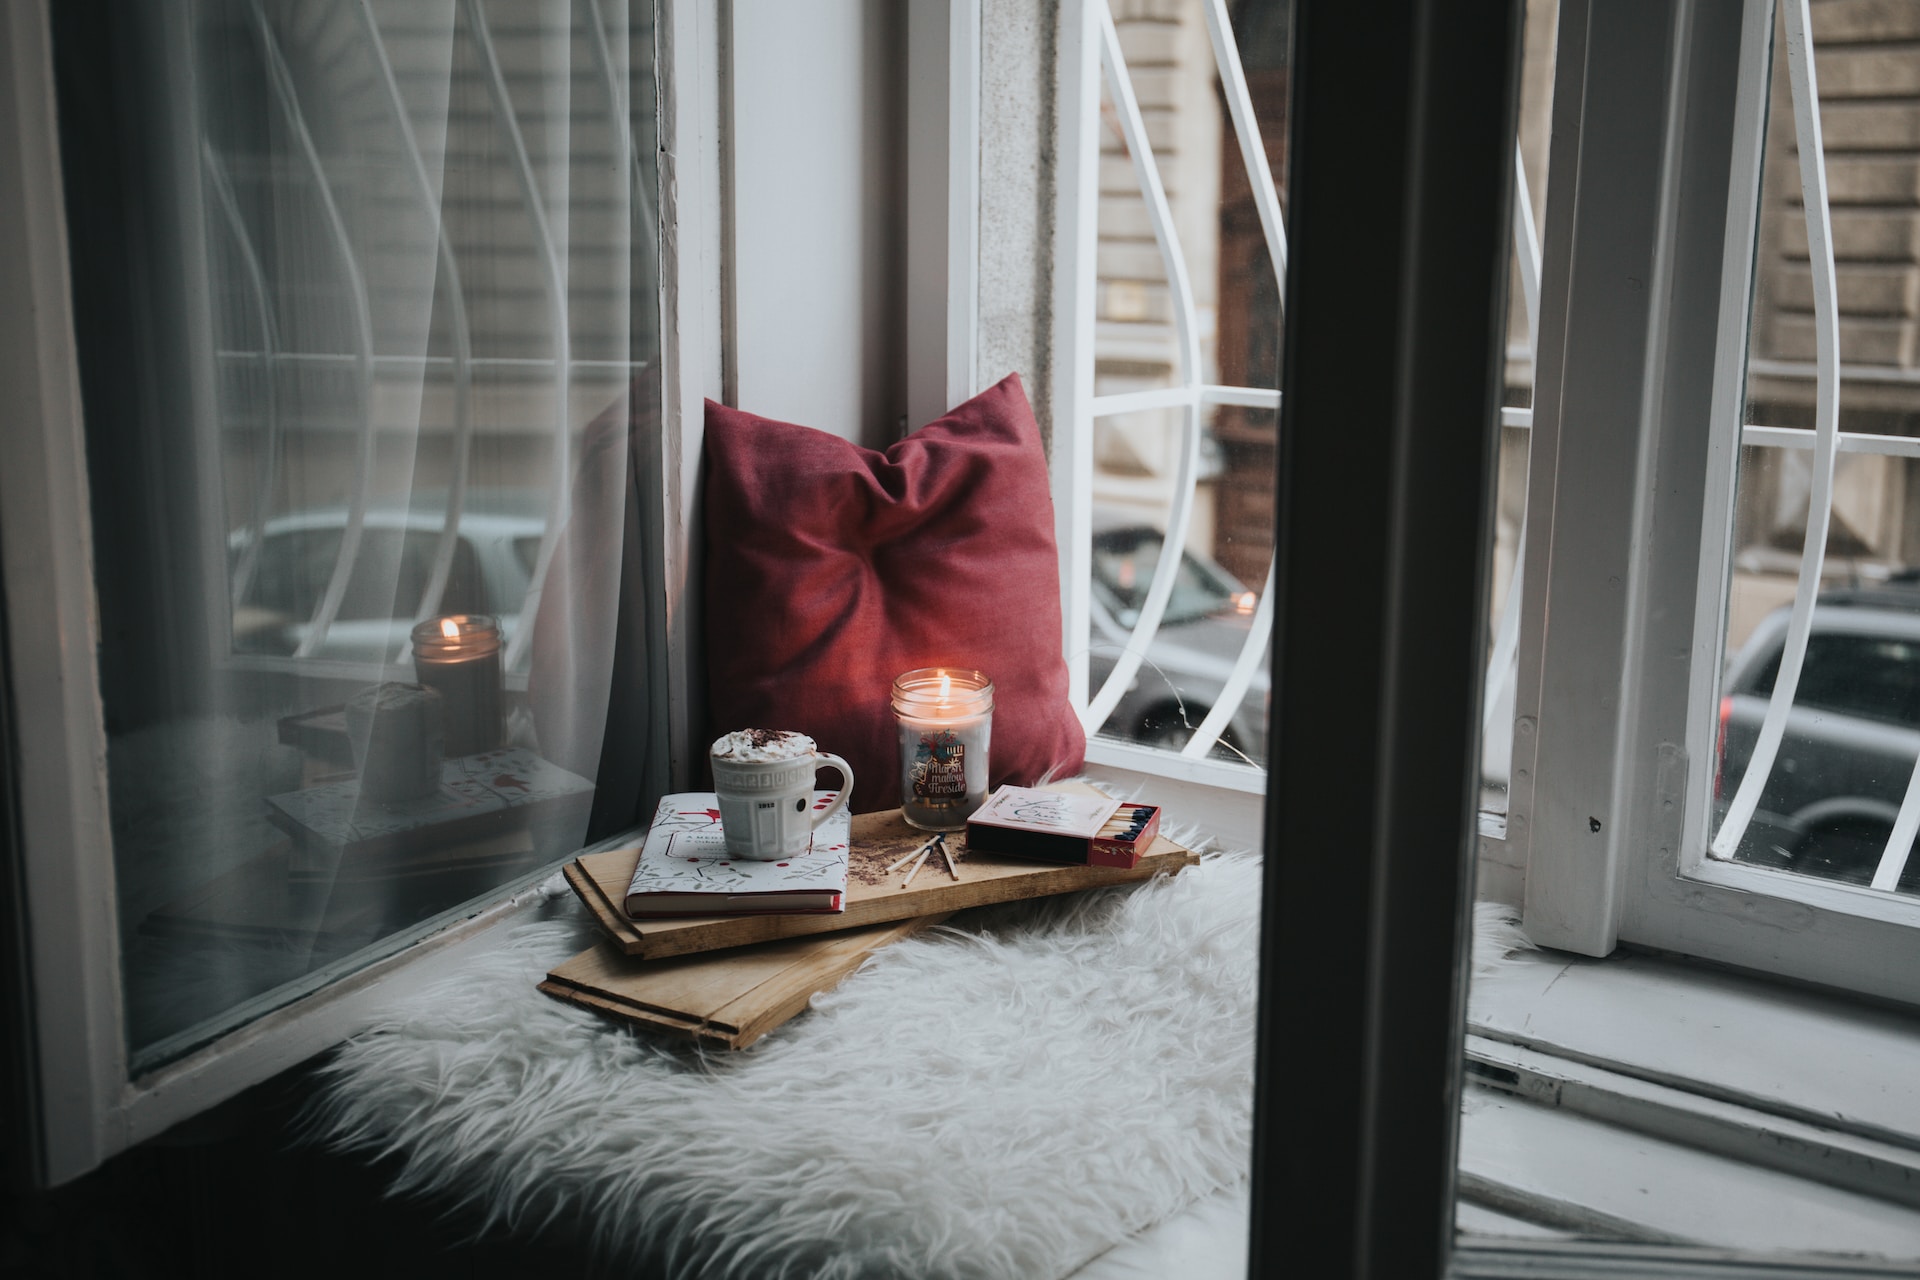 A cozy set-up in a window bench covered with a shaggy rug, with a candle, a pillow, a mug, a journal, and a box of matches.